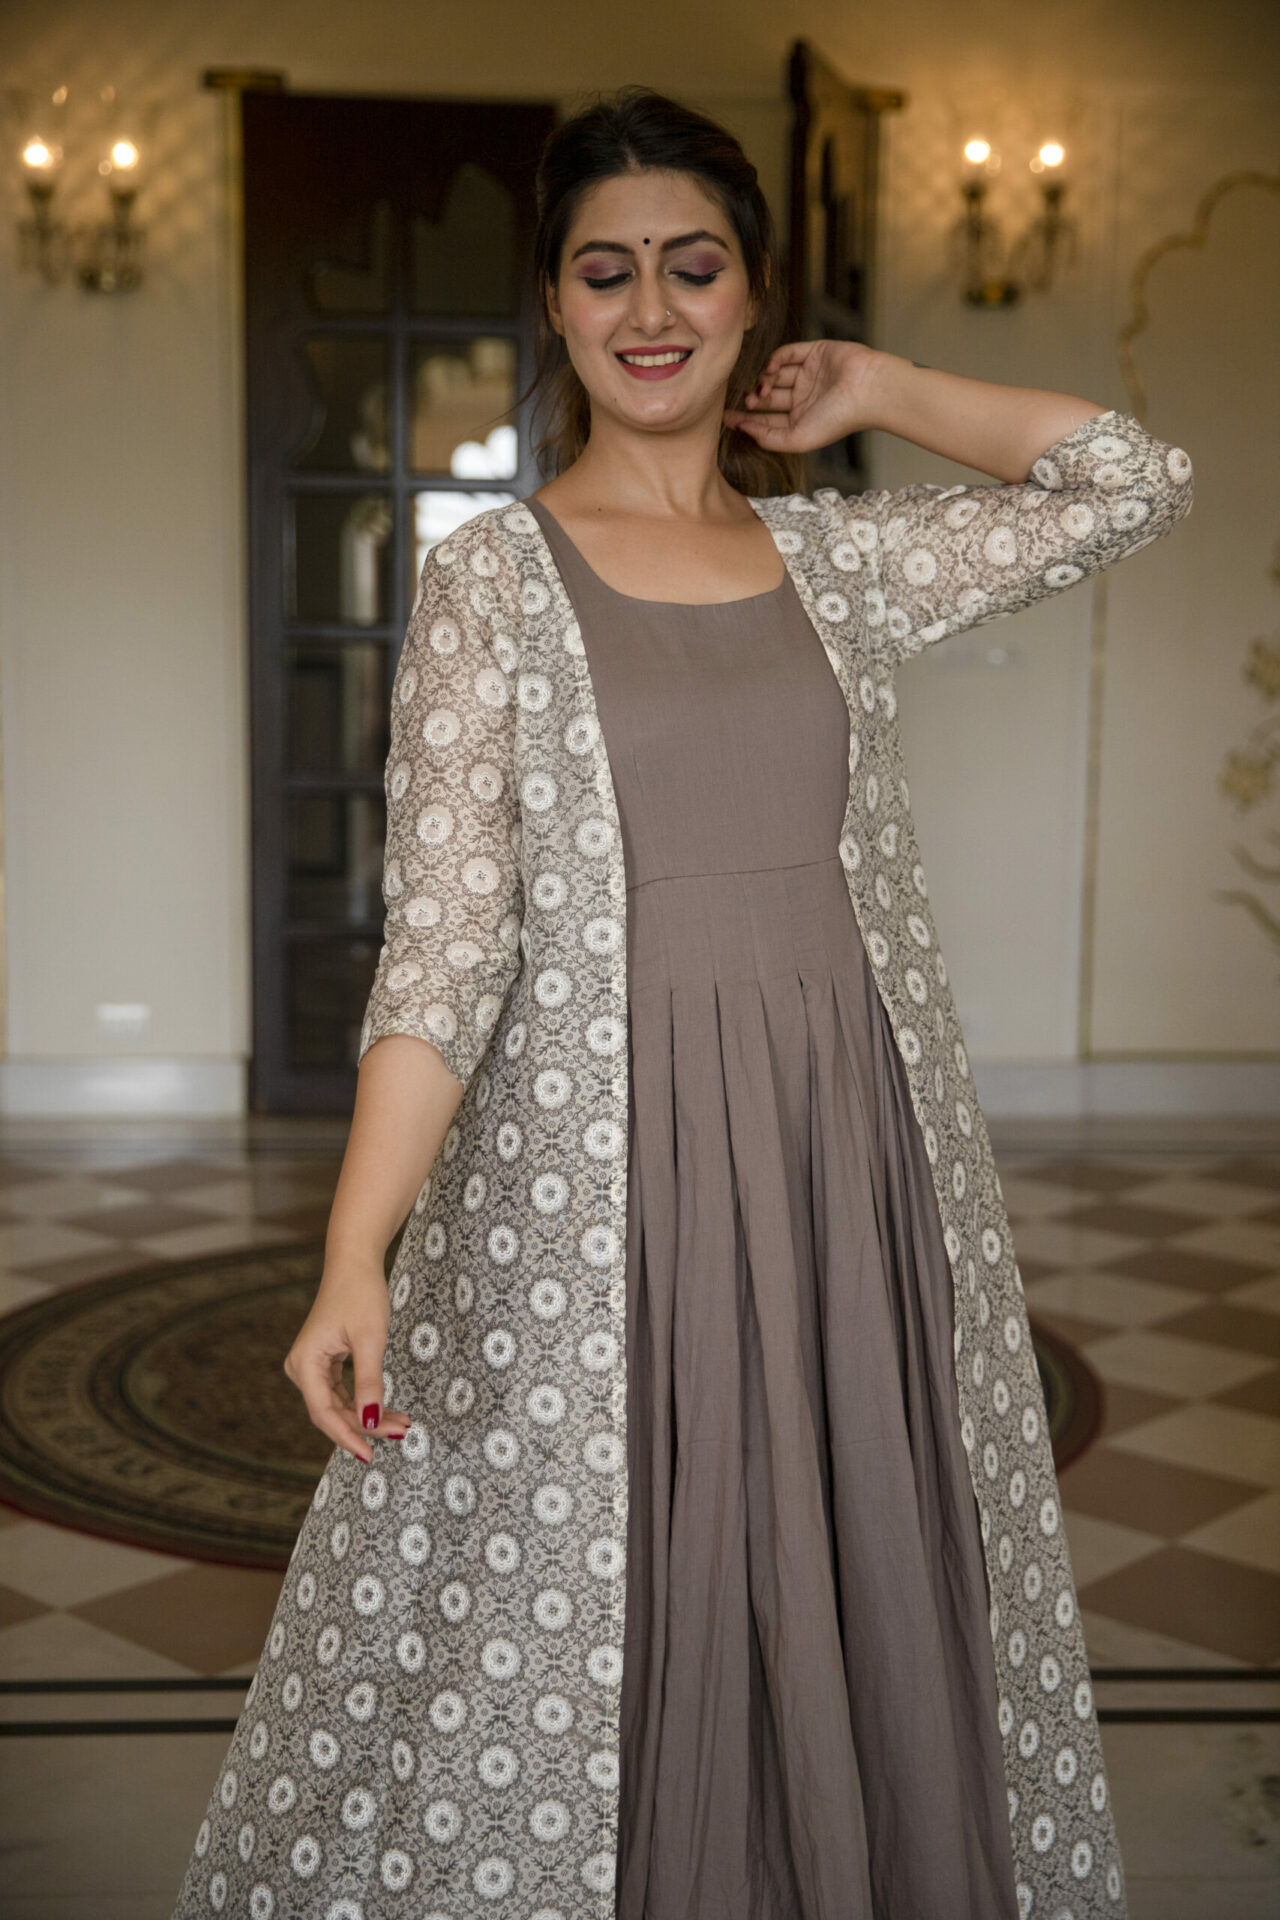 JACKET STYLE KURTI DESIGNS FOR YOUR ETHNIC LOOK